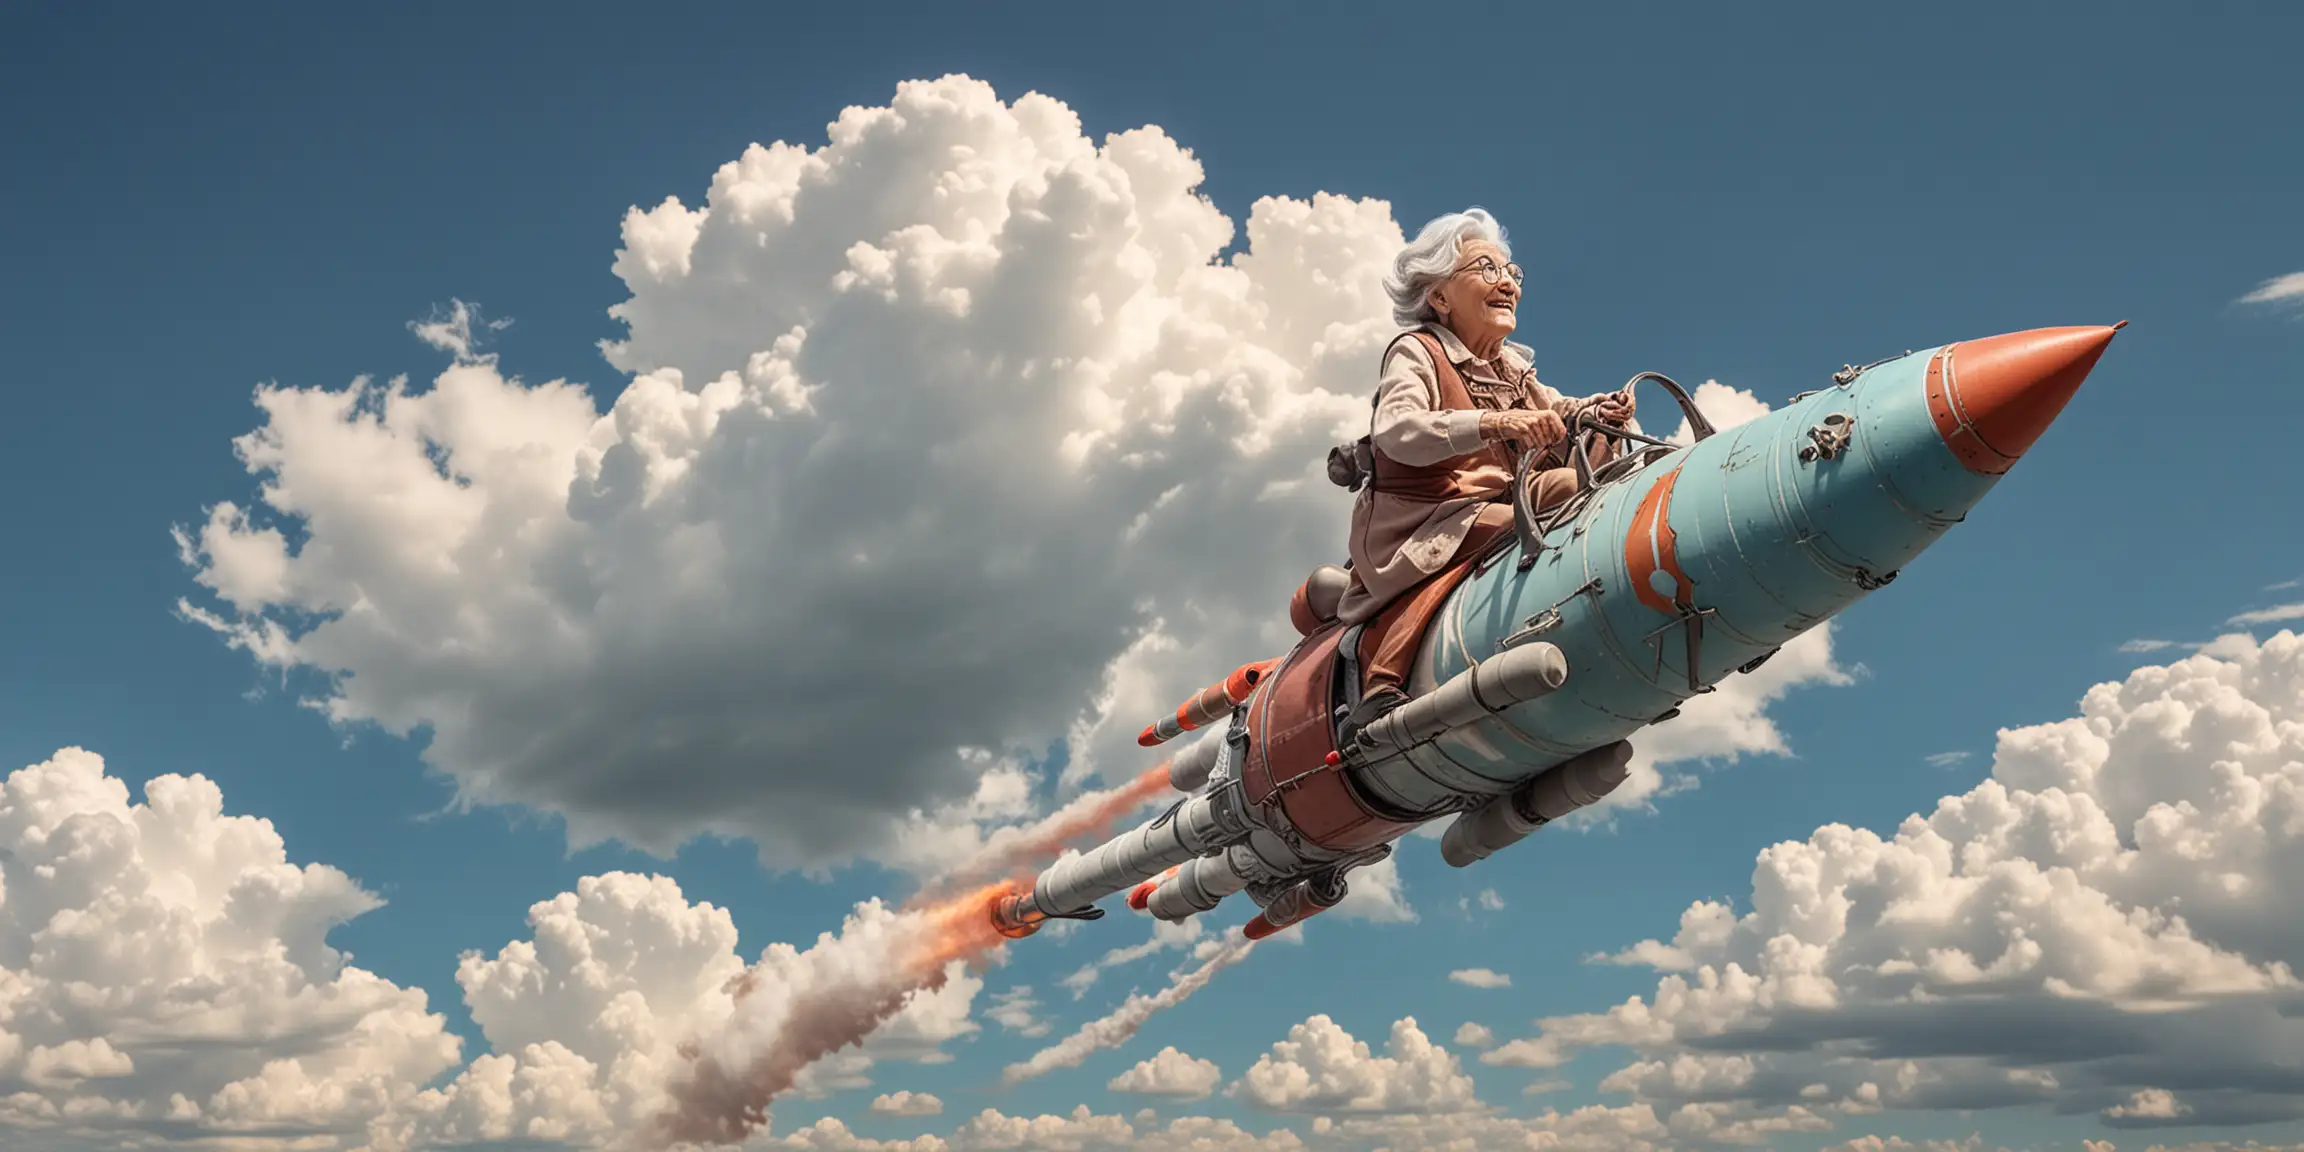 OLD LADY WITH GRAY HAIR RIDING A ROCKET ON A BLUE SKY WITH PUFFY CLOUDS